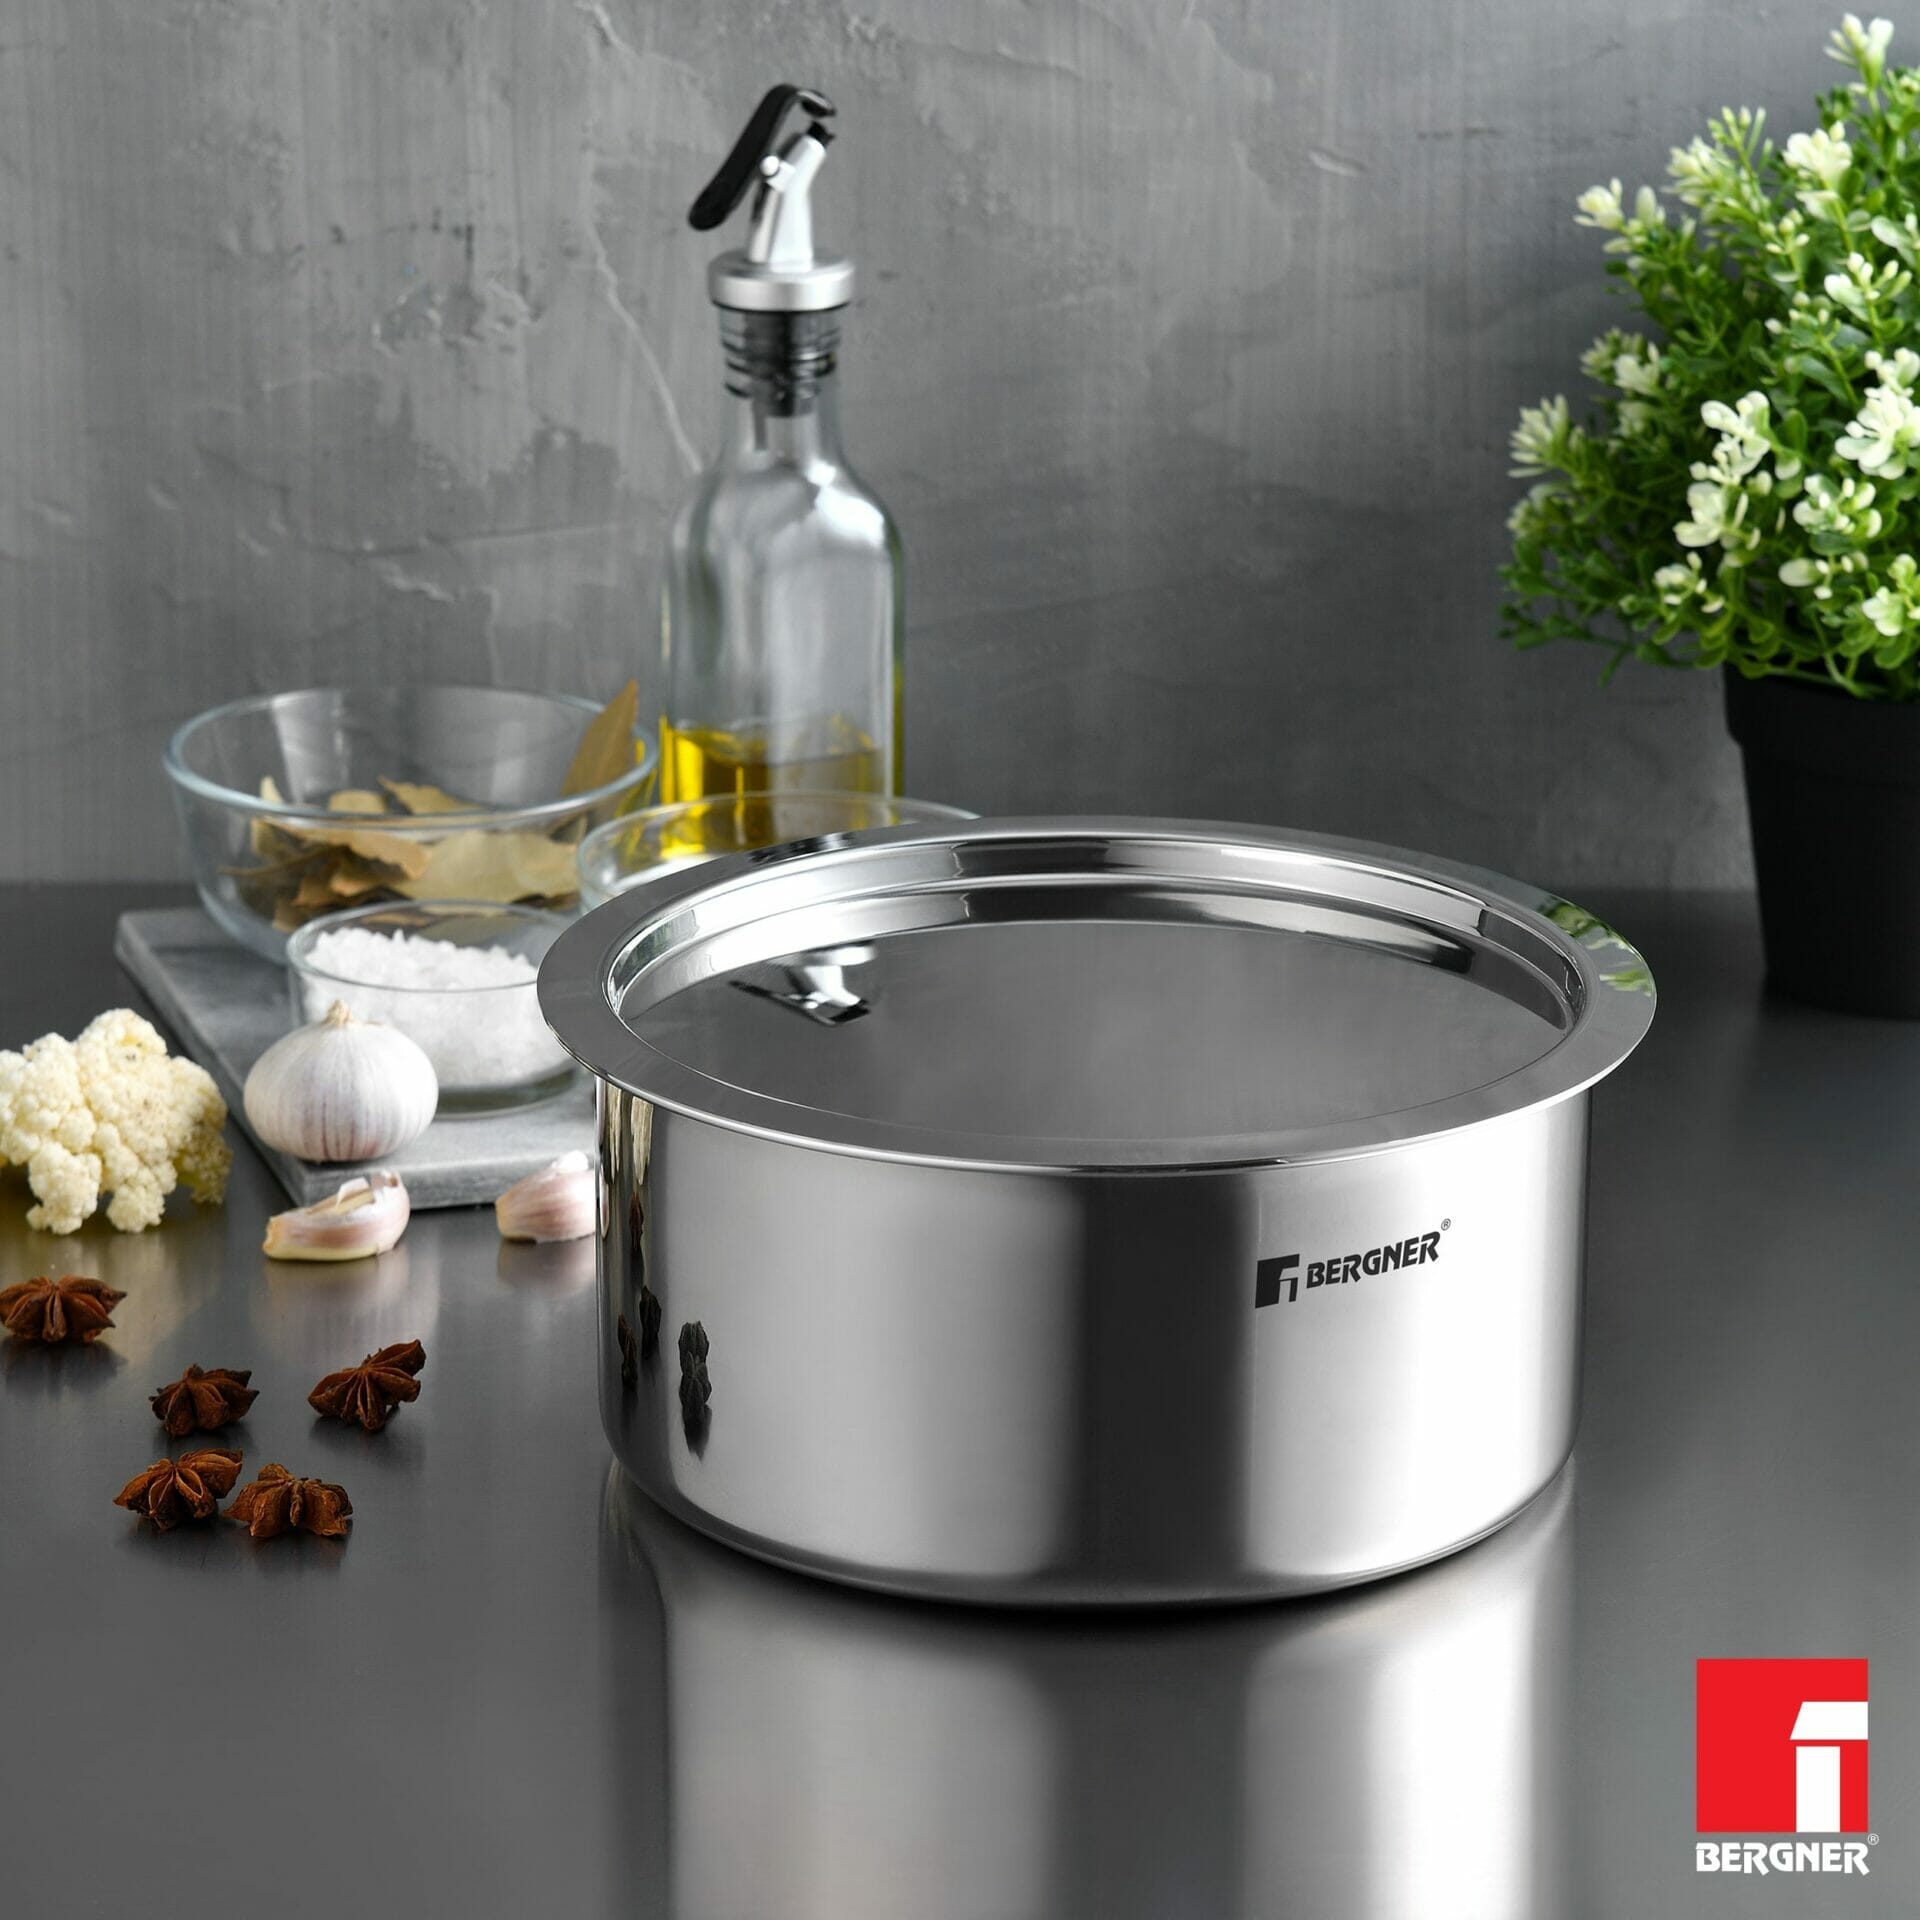 Bergner Tripro 16 cm Silver Triply Stainless Steel Tope with Stainless Steel Lid